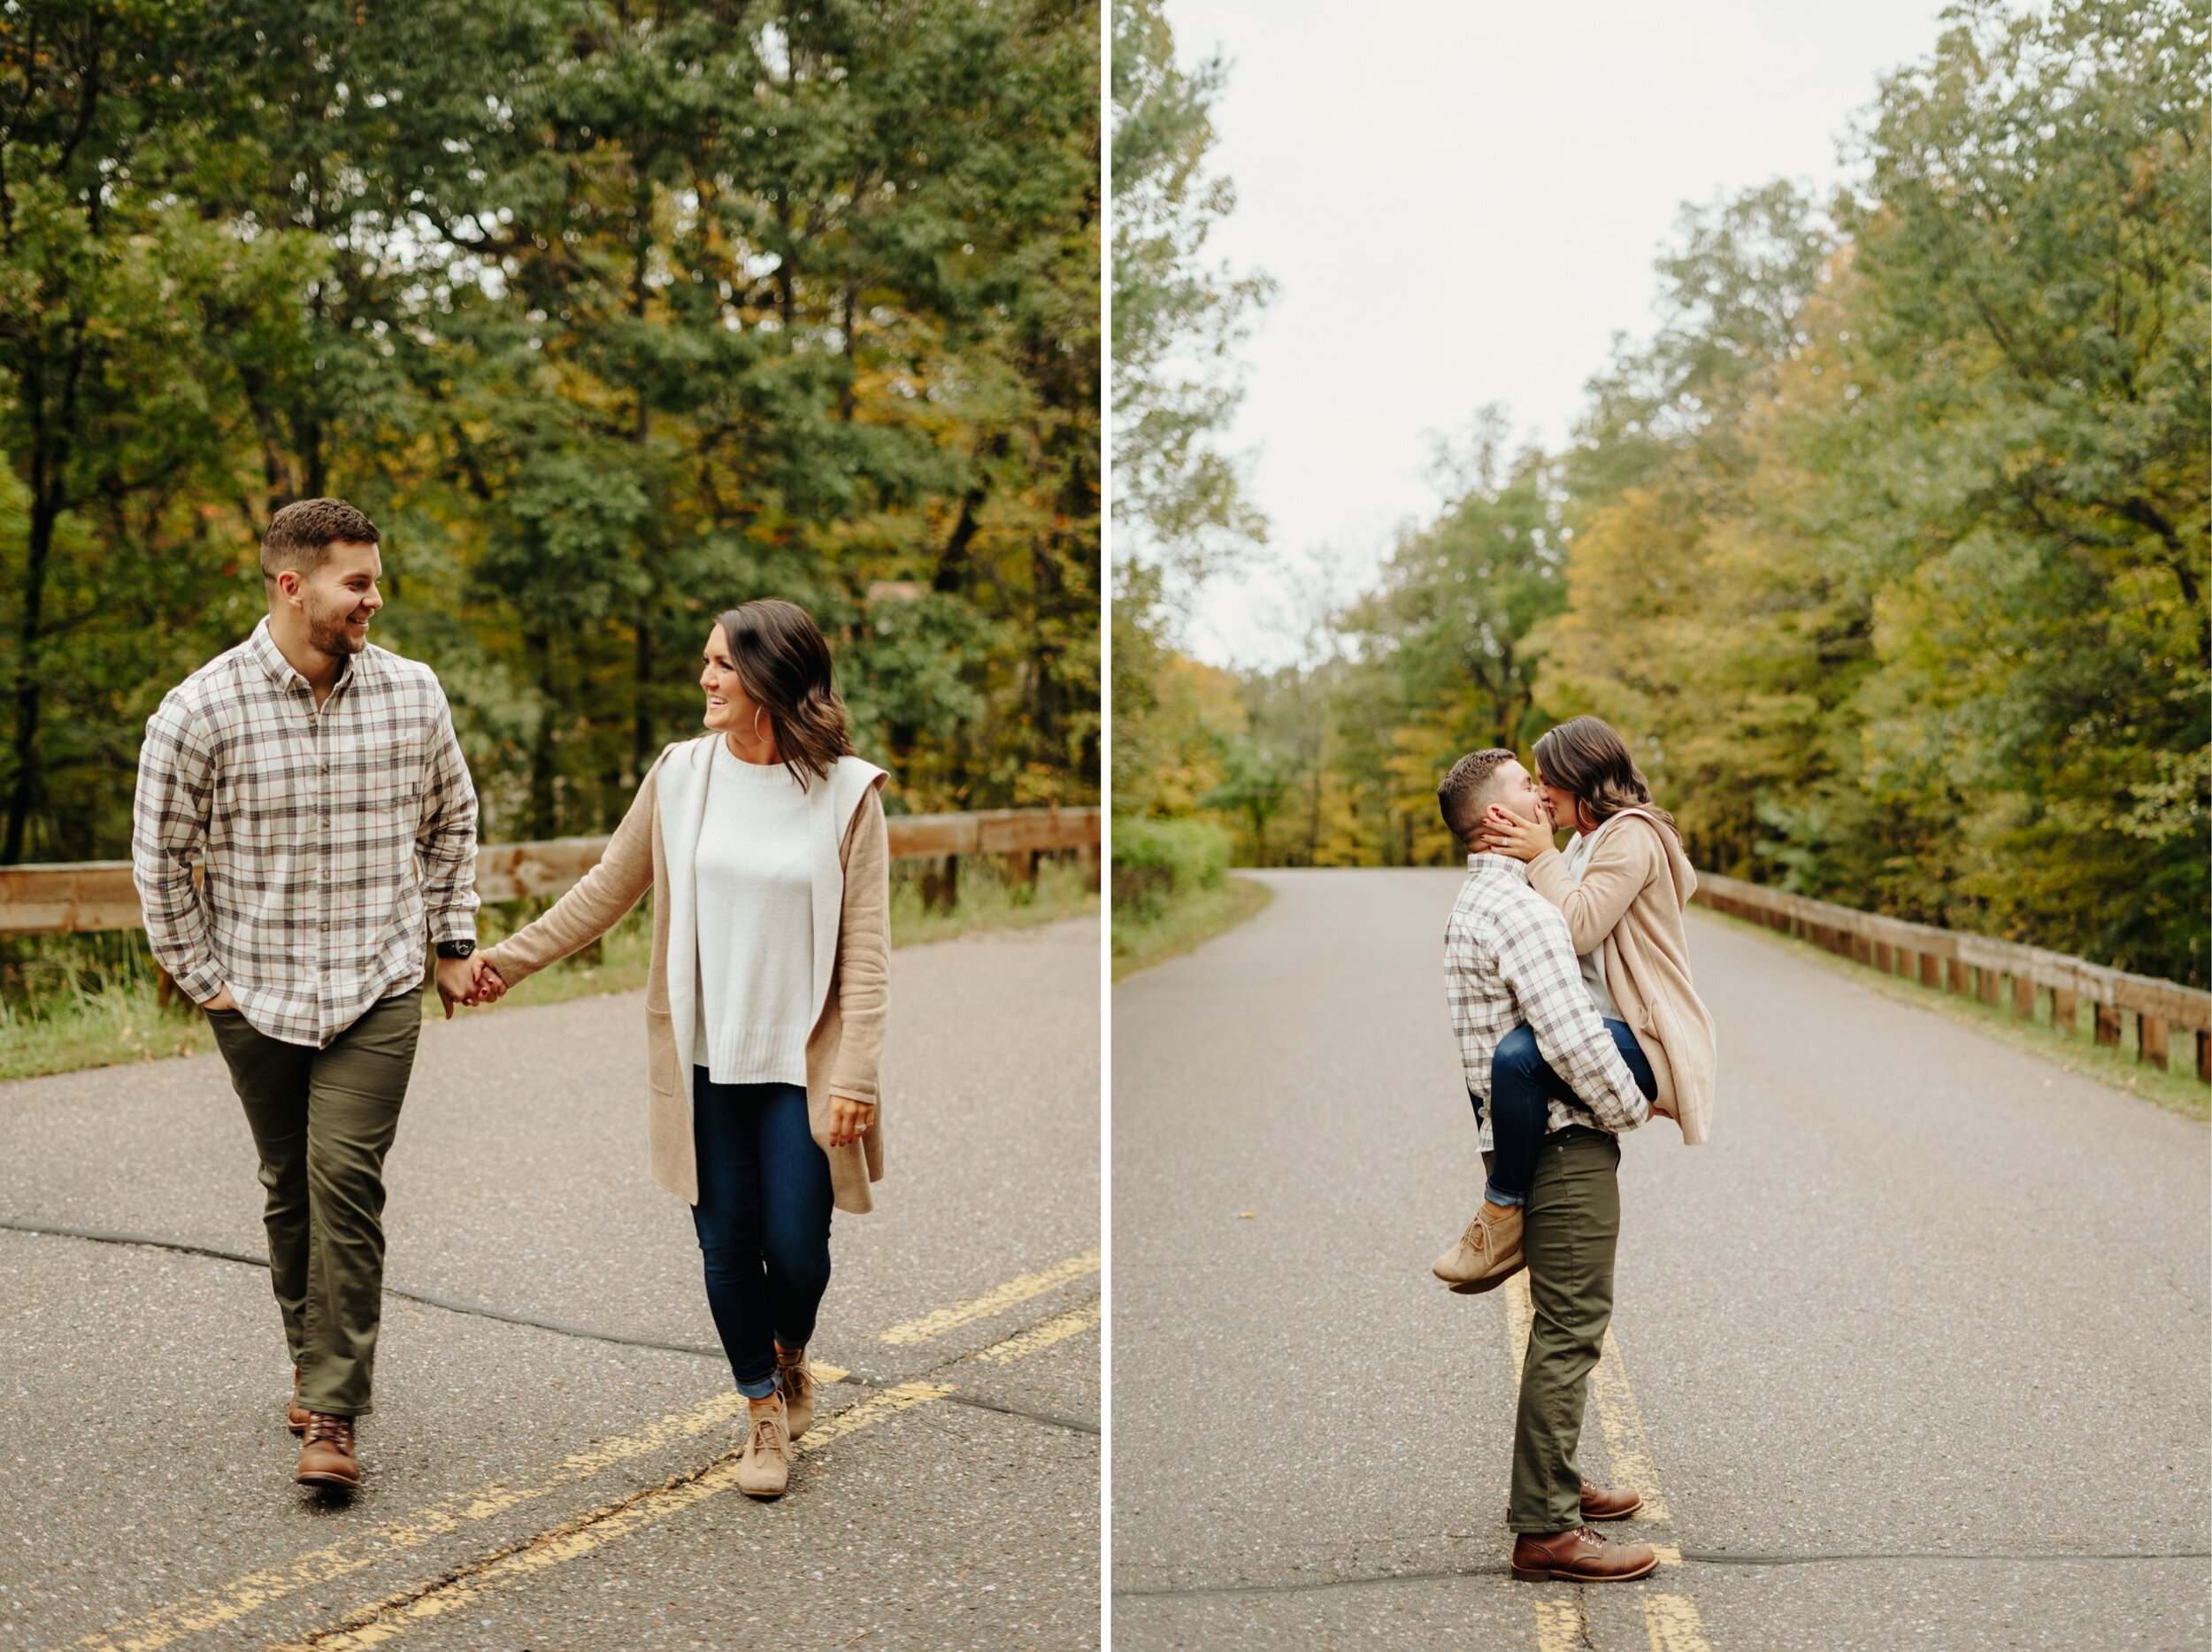 04_taylors-falls-engagement-session-interstate-park-mckenzie-josh-17_taylors-falls-engagement-session-interstate-park-mckenzie-josh-21.jpg